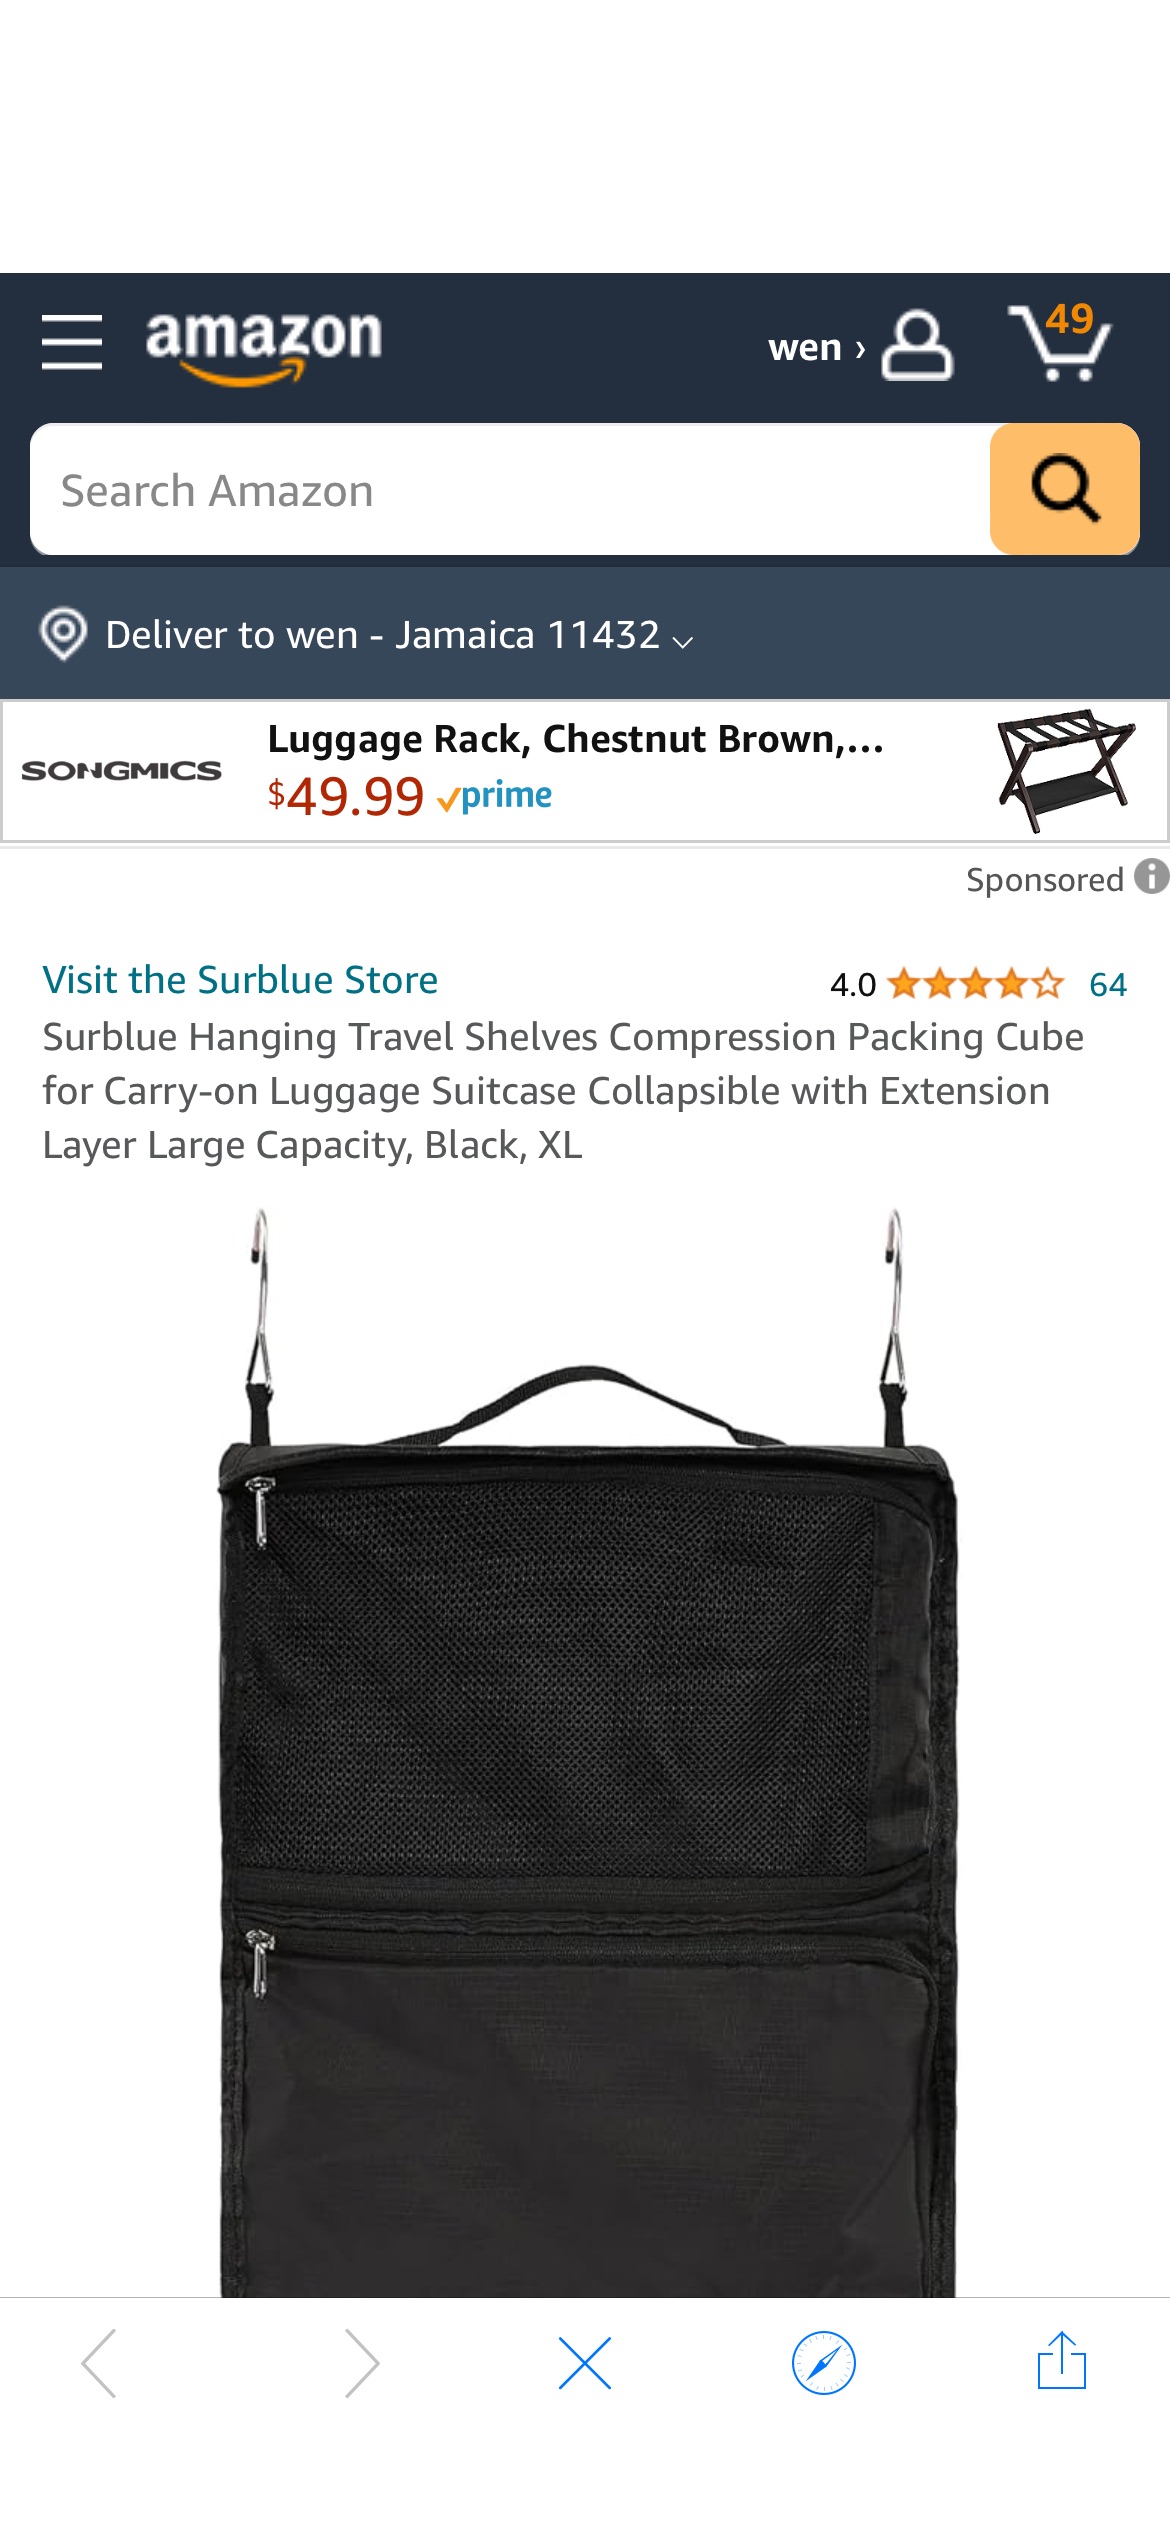 Amazon.com: Surblue Hanging Travel Shelves Compression Packing Cube for Carry-on Luggage Suitcase Collapsible with Extension Layer Large Capacity, Black, XL : Home & Kitchen